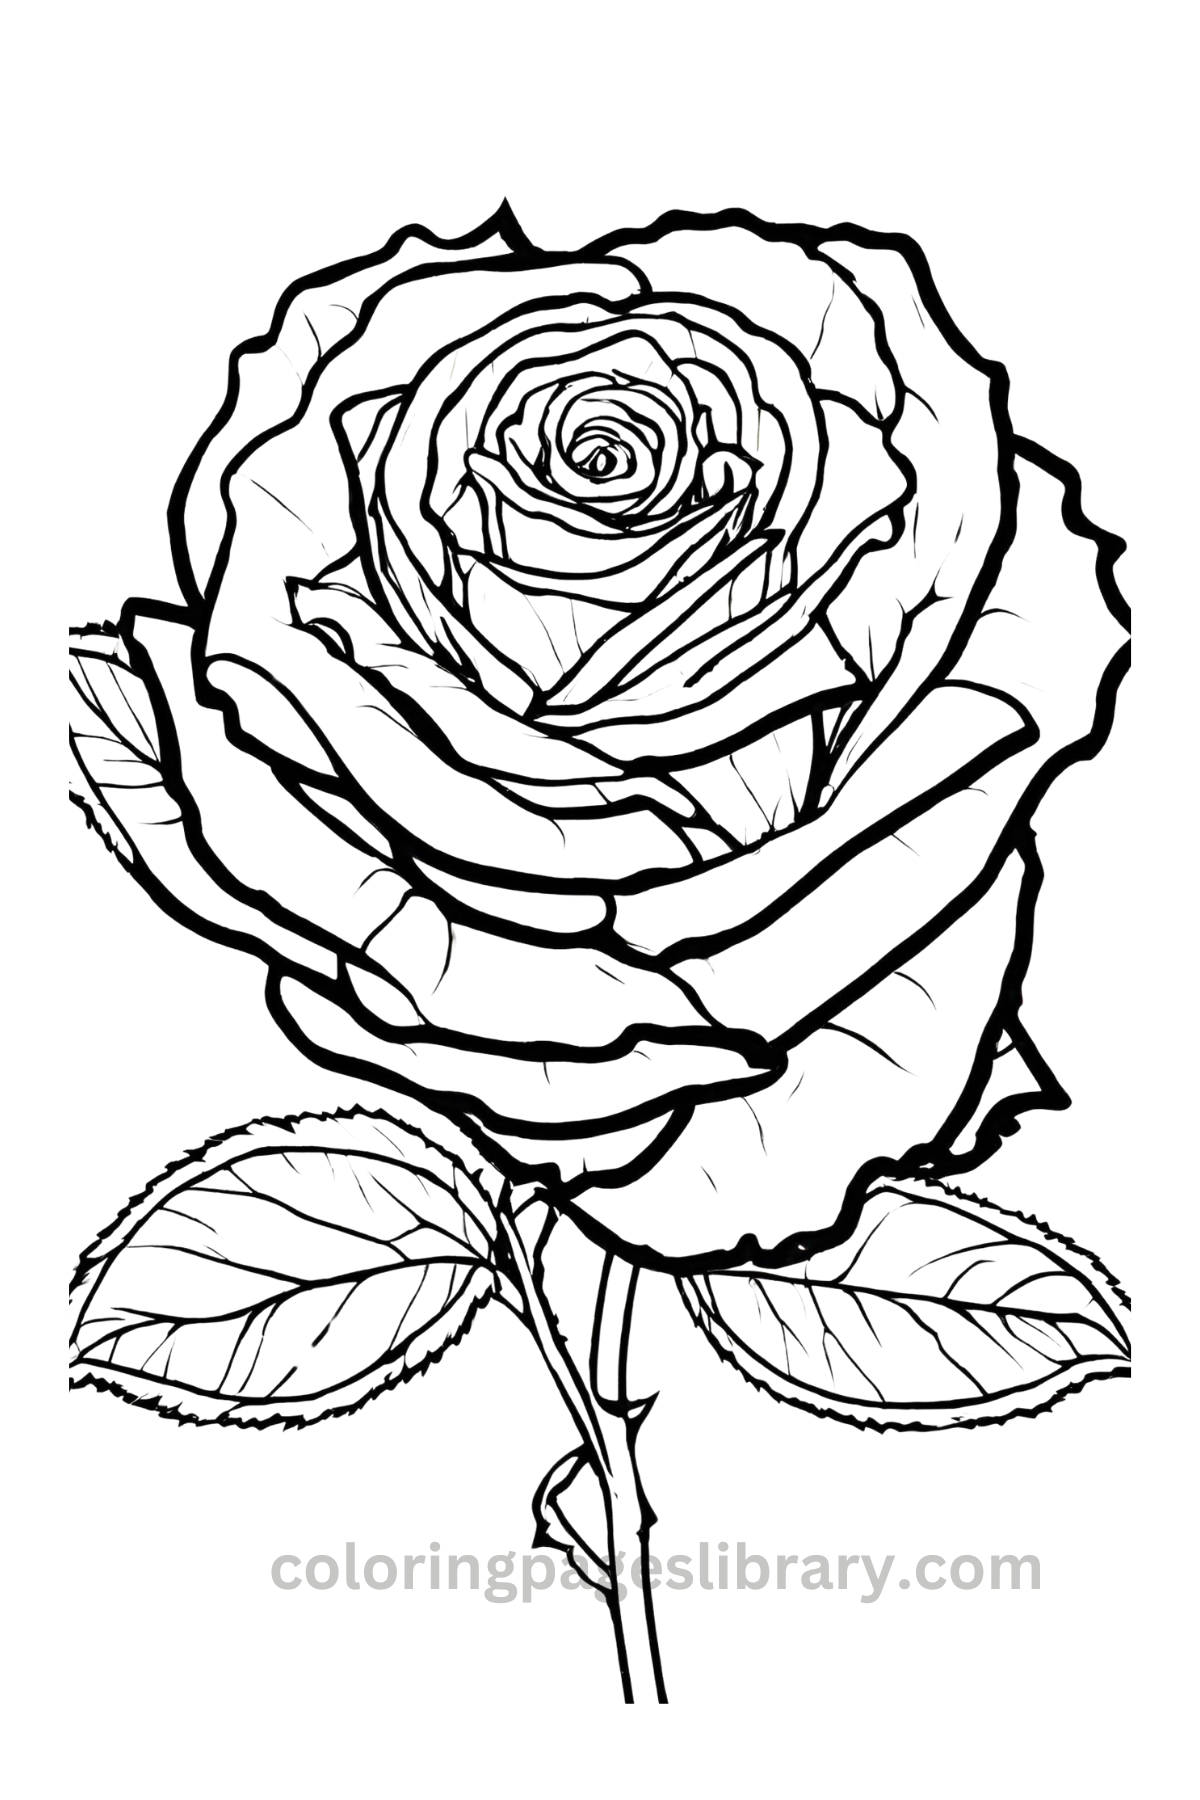 Easy Rose coloring page